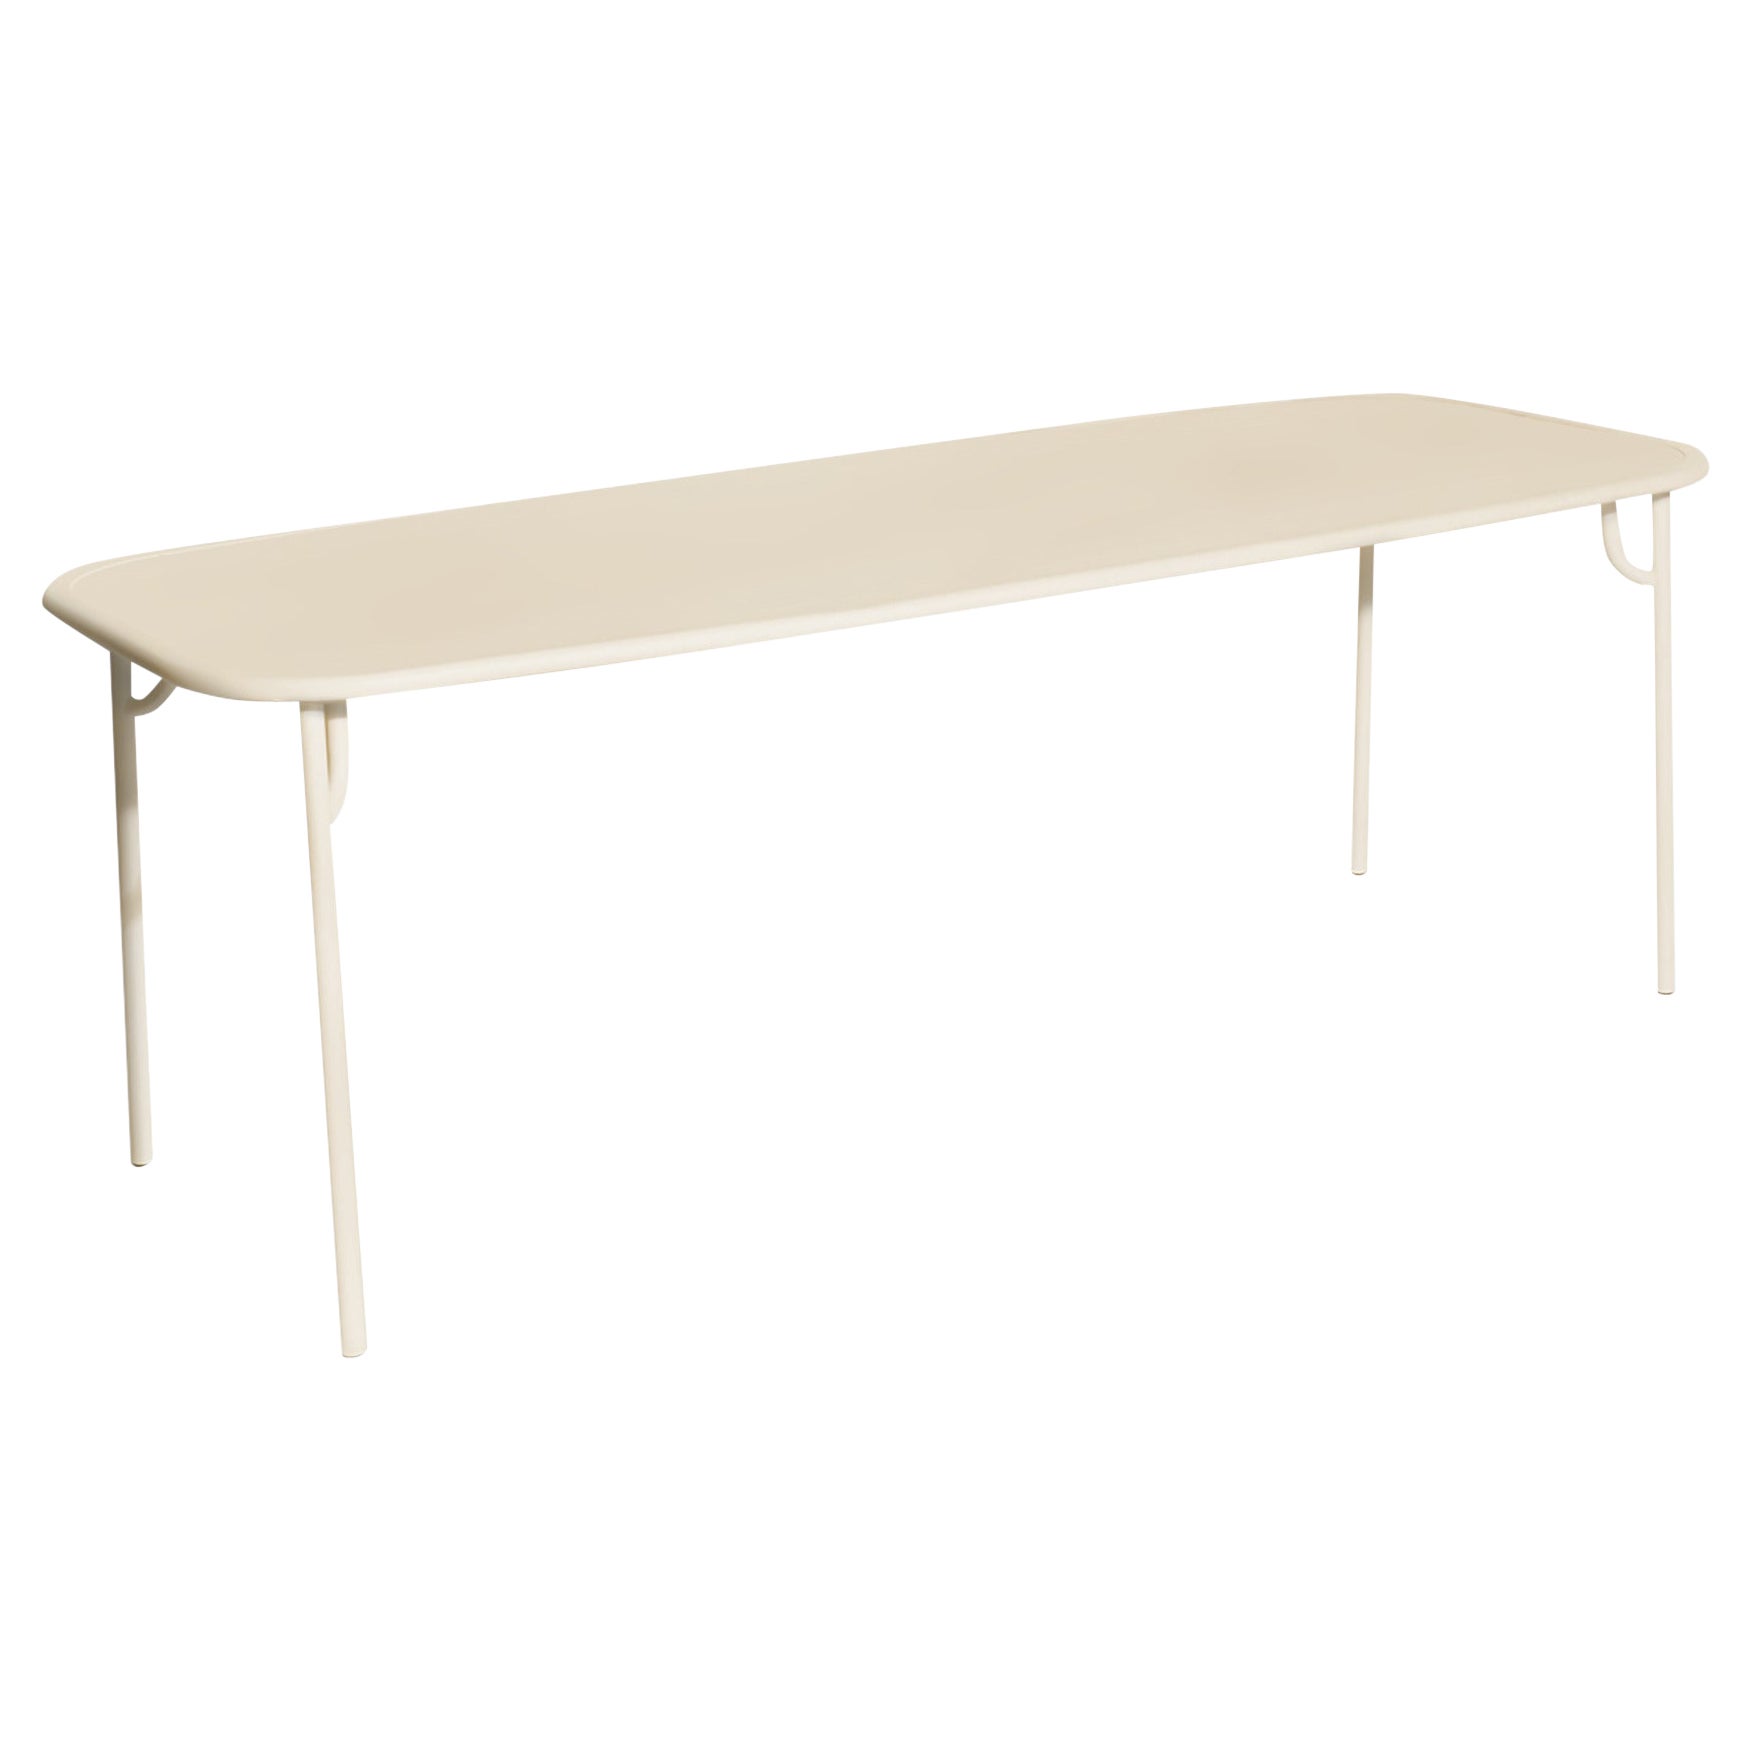 Petite Friture Week-End Large Plain Rectangular Dining Table in Ivory Aluminium For Sale